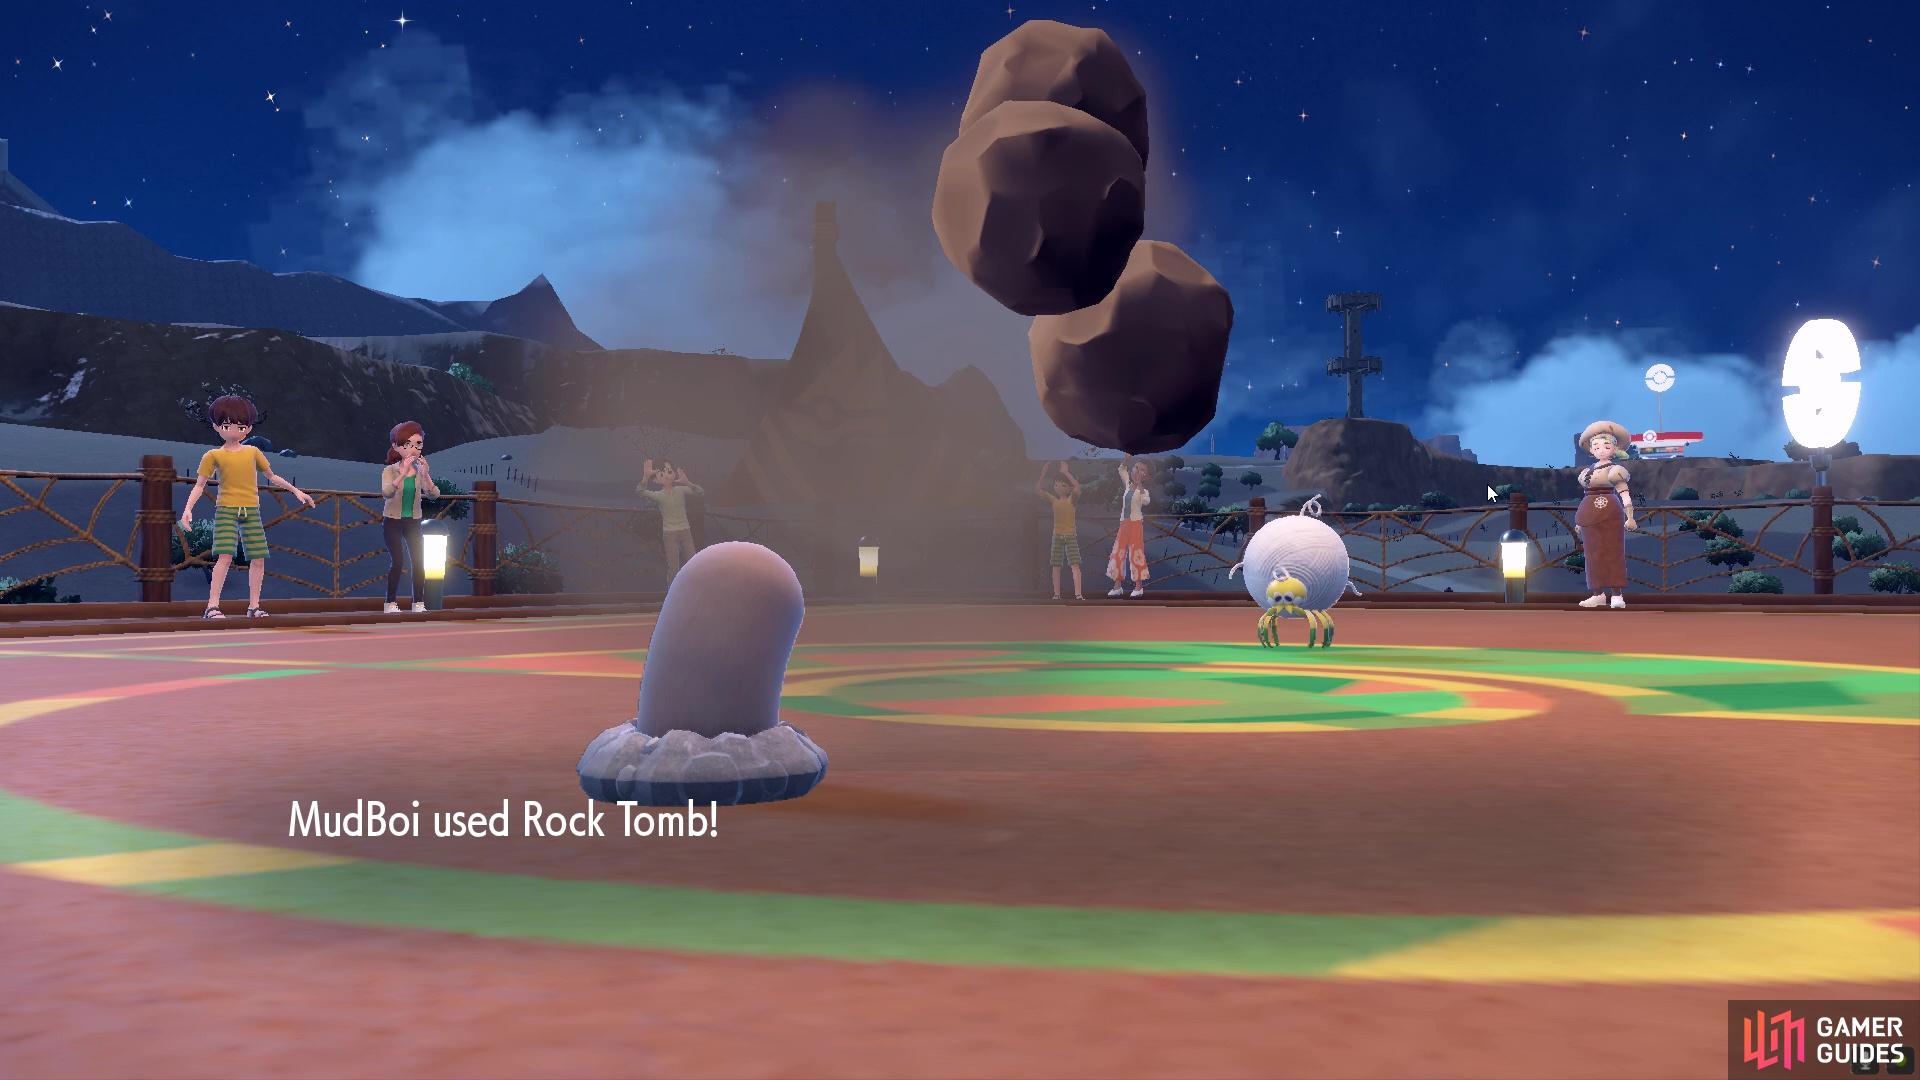 Our Diglett has the move ‘Rock Tomb’ which is super effective against bug-types.